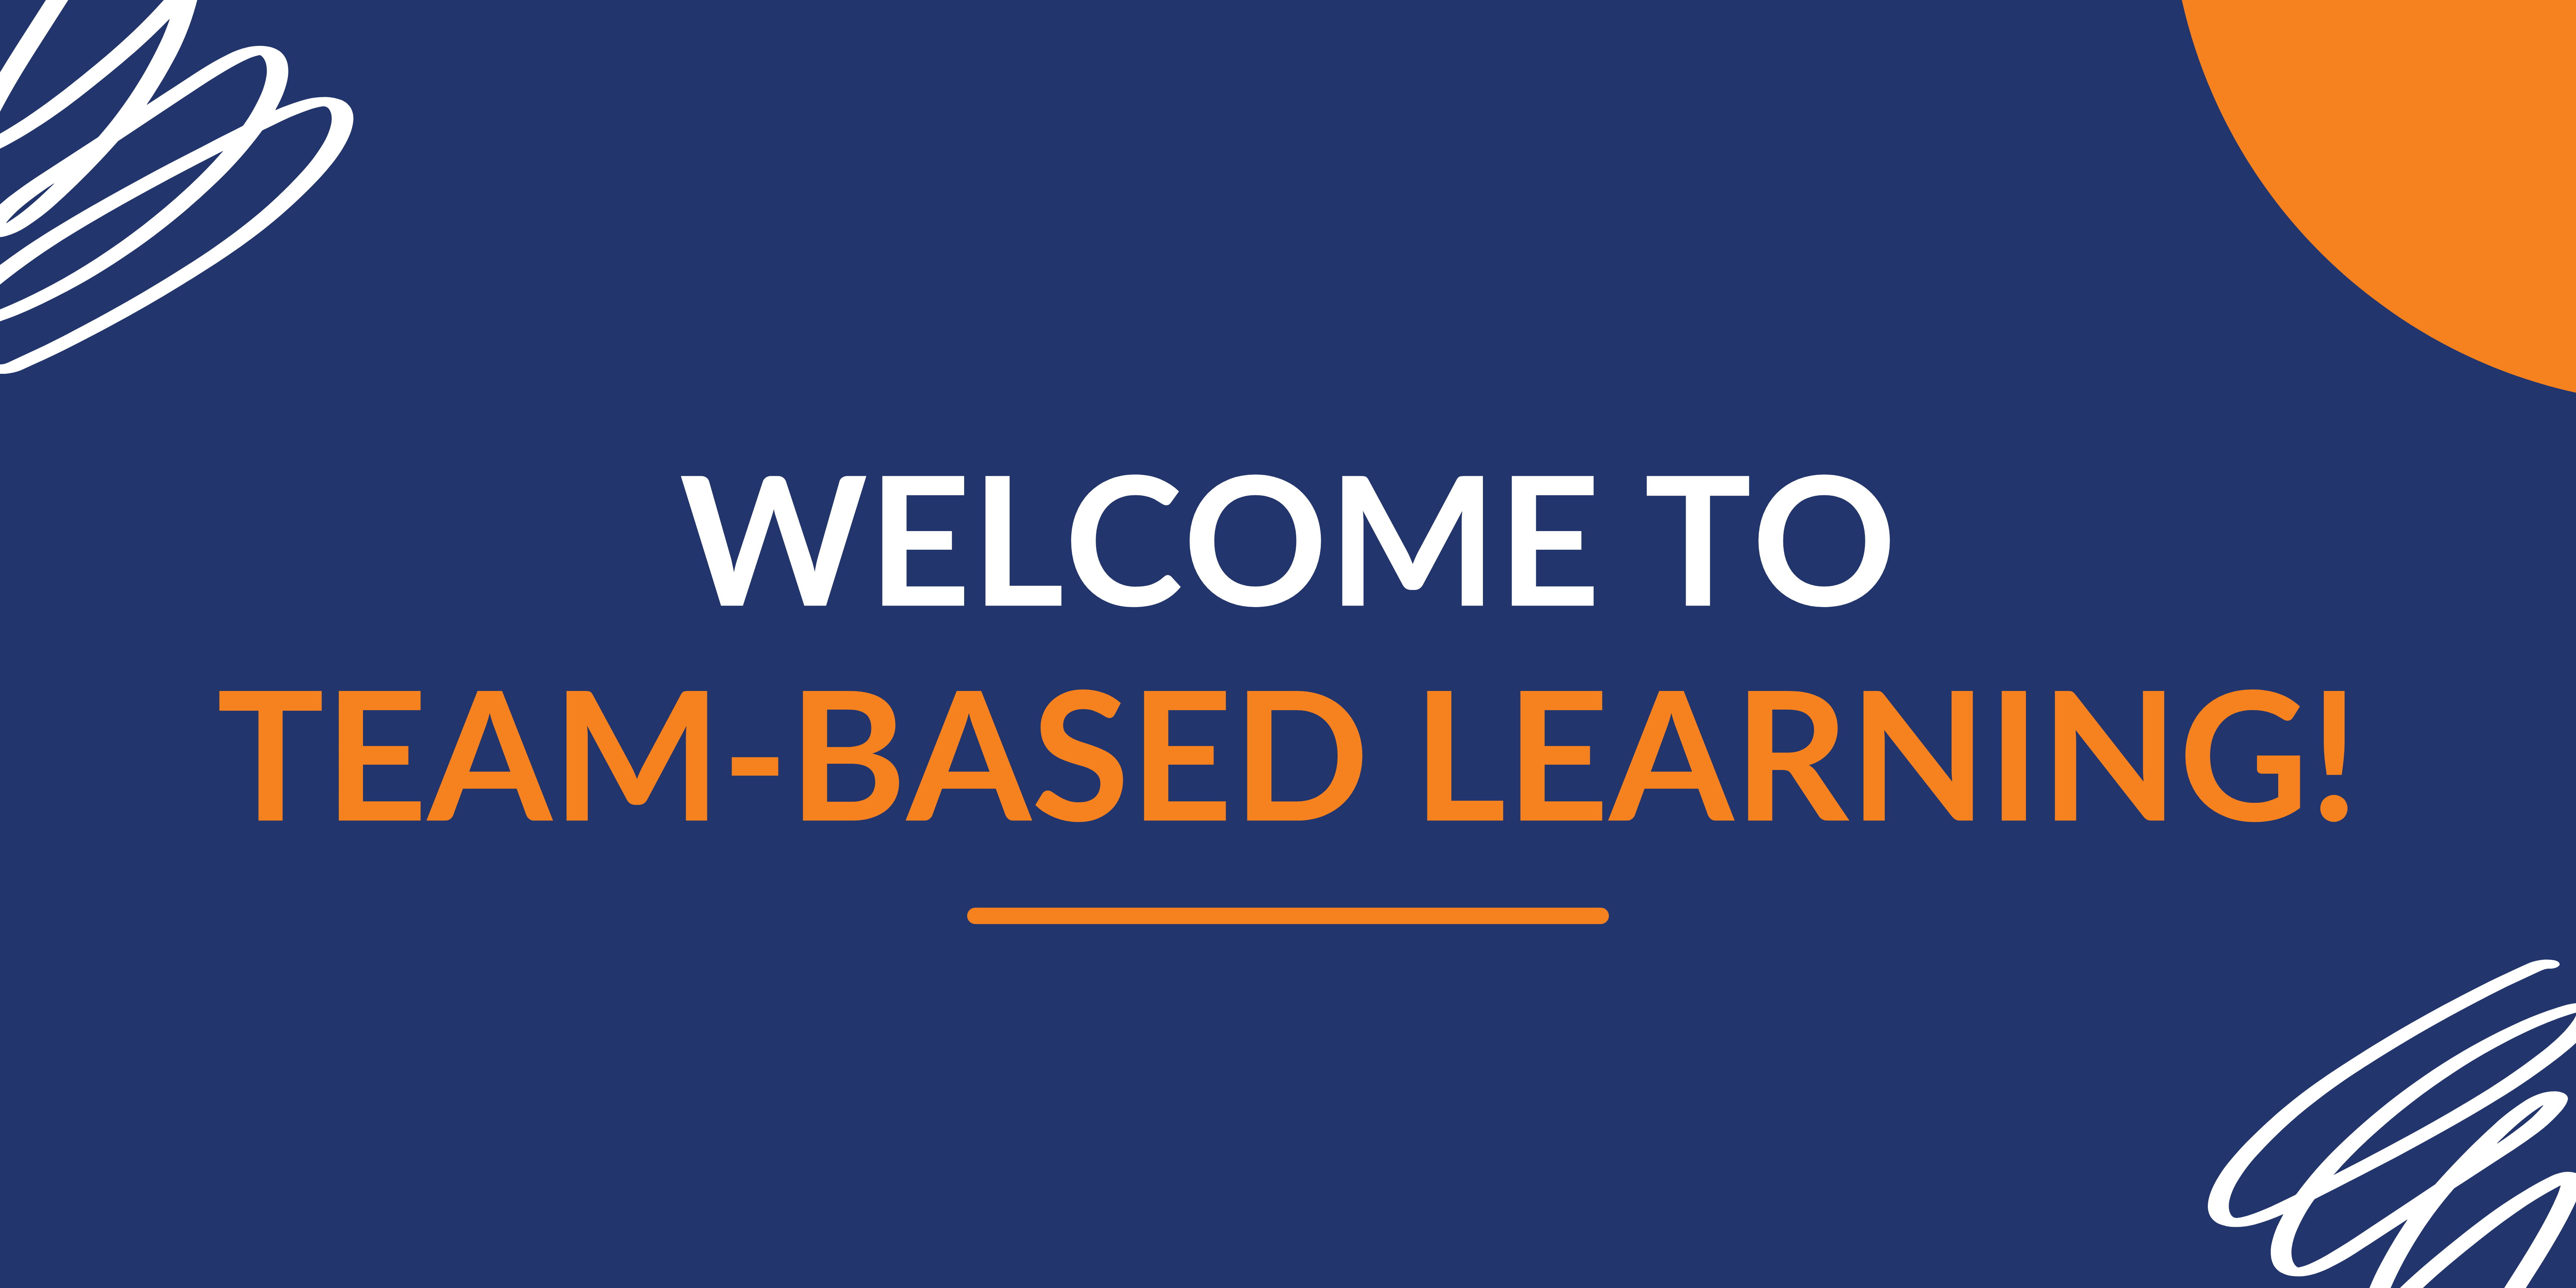 Welcome to team-based learning!